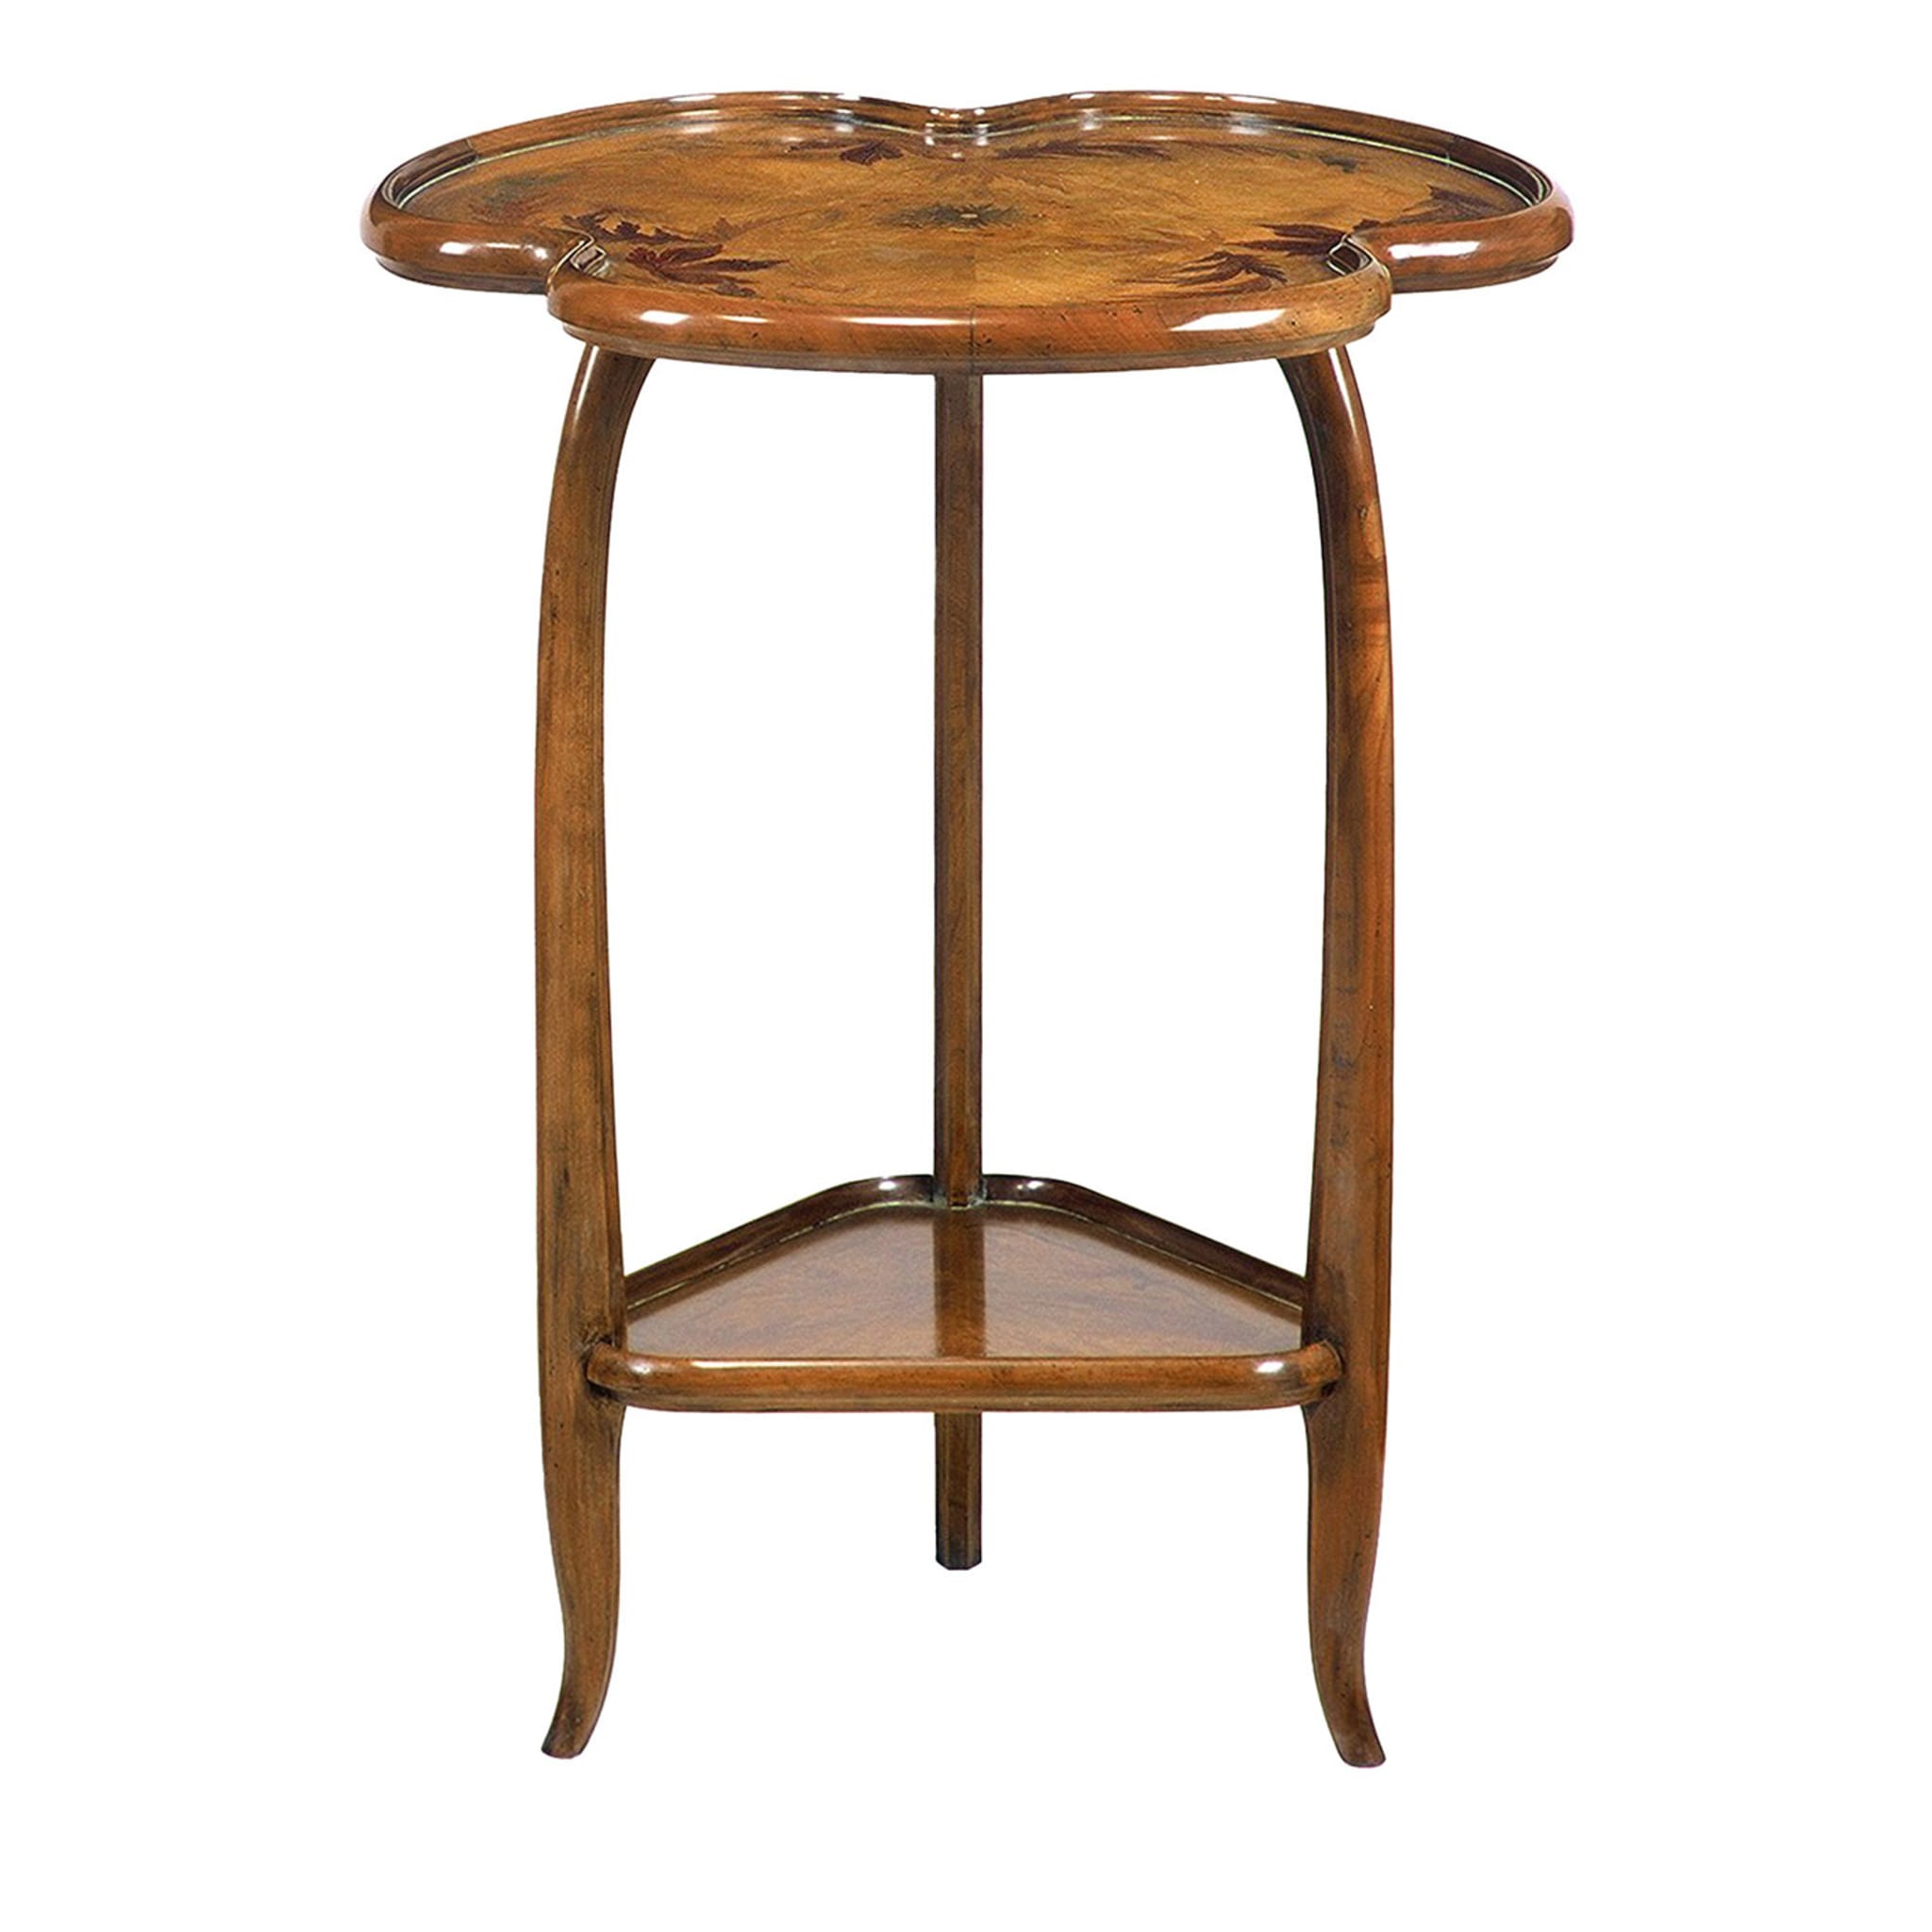 French Art Nouveau-Style Clover Side Table by Emile Gallè - Main view